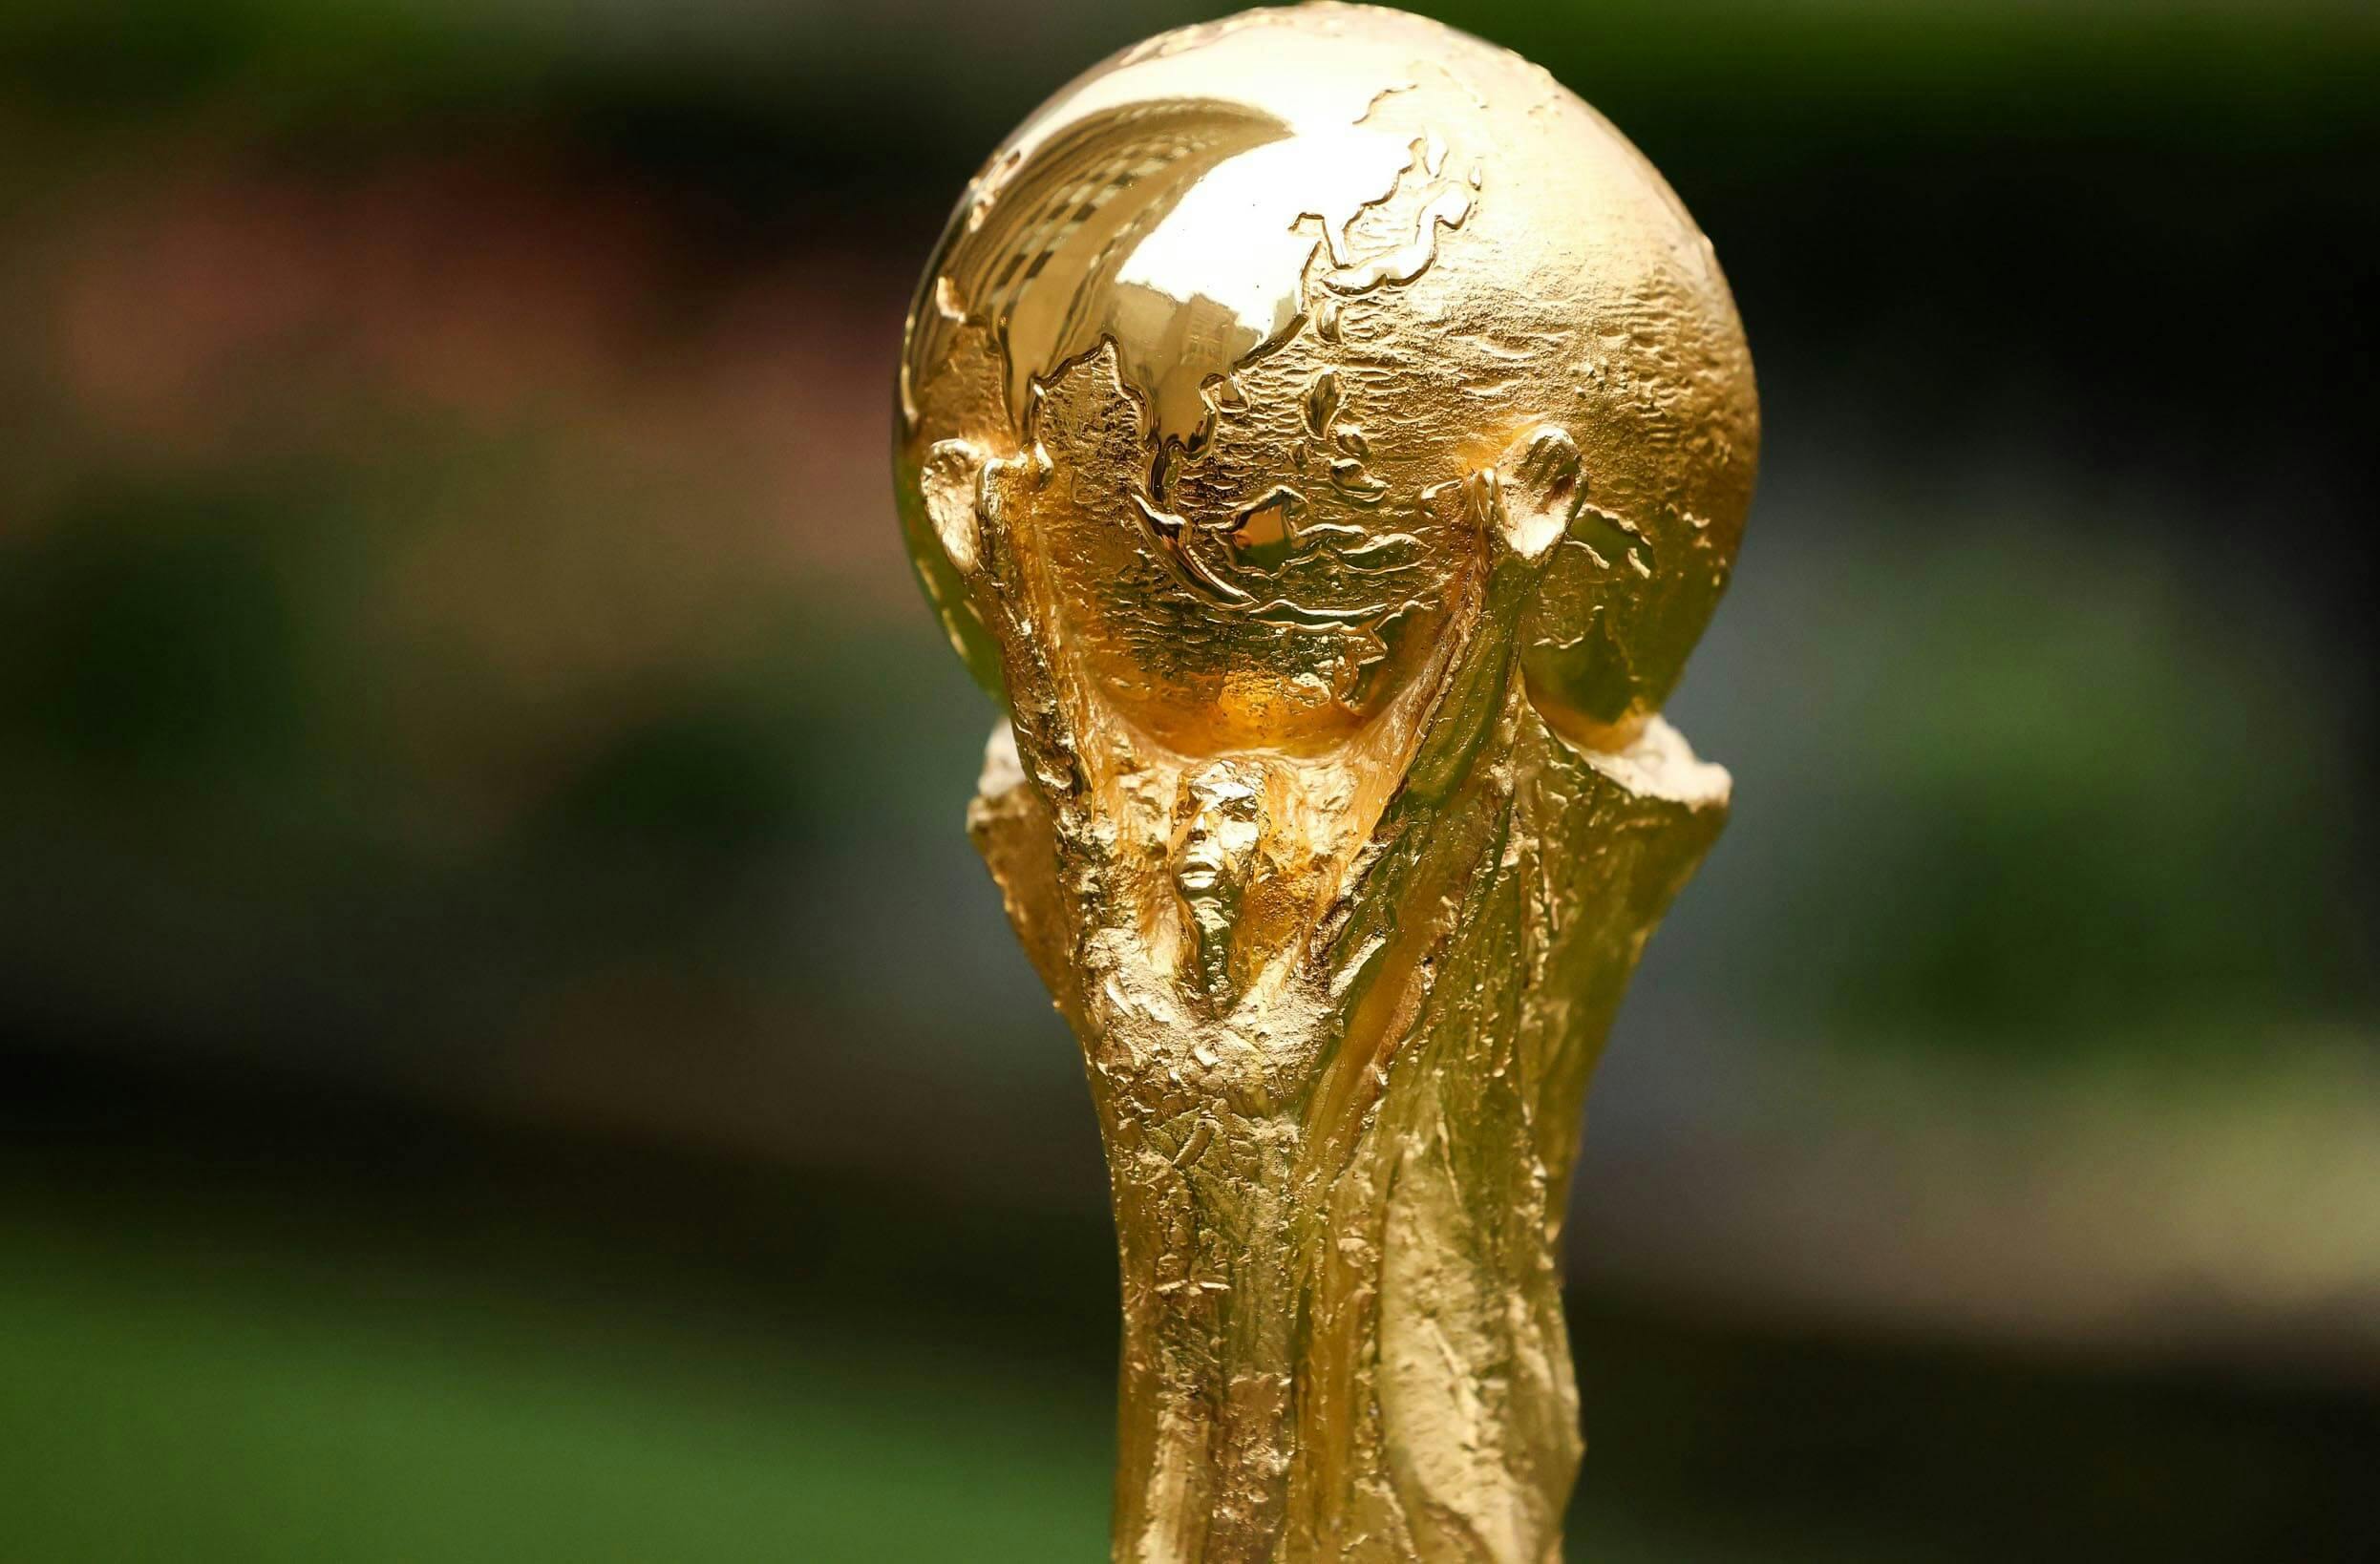 FIFA World Cup Qatar 2022 - Schedule, Odds and Betting Info